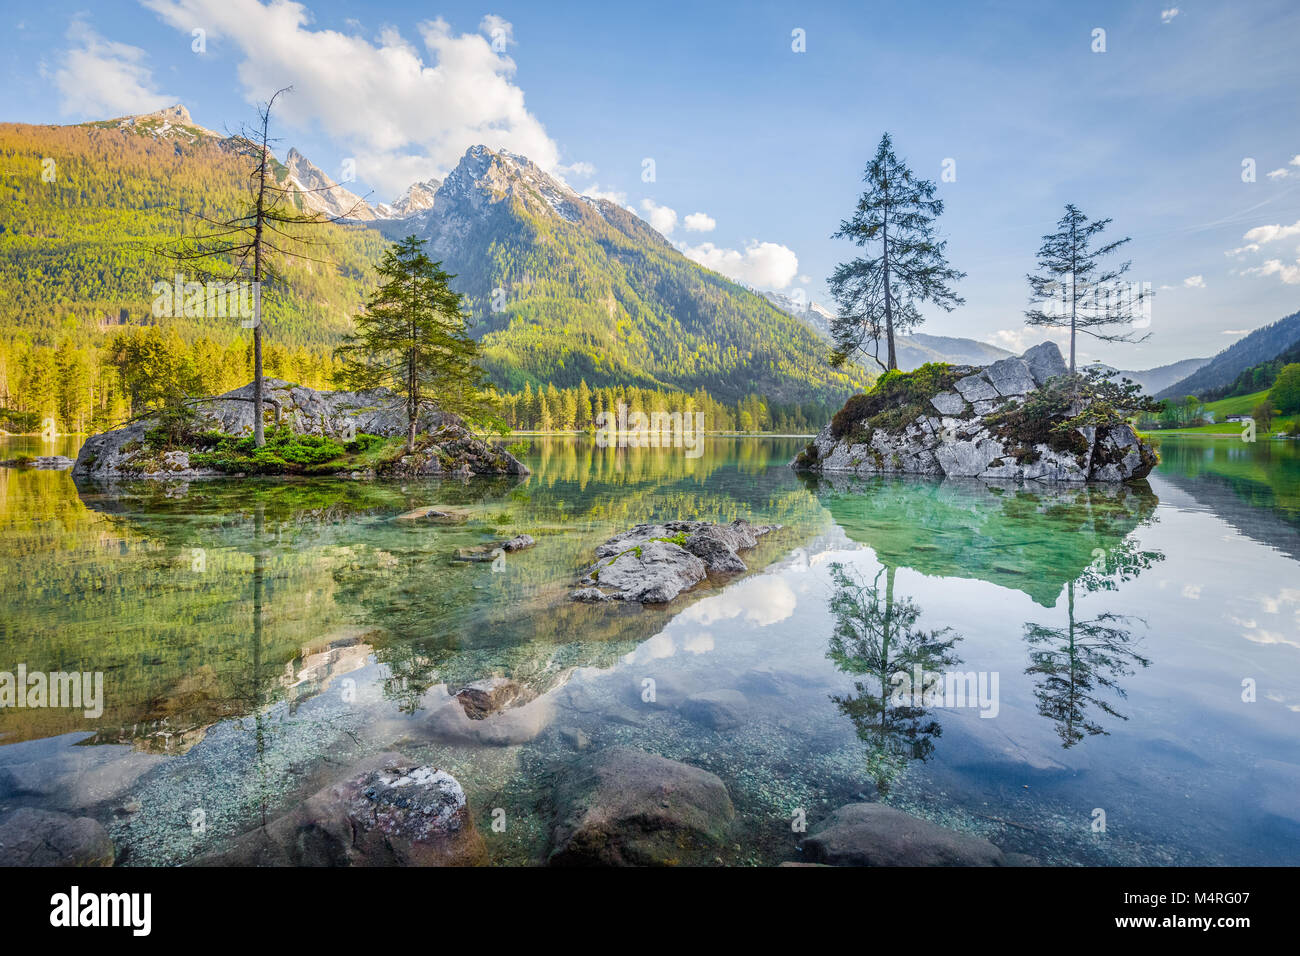 Beautiful scene of trees on a rock island in idyllic scenery at charming Lake Hintersee with blue sky and clouds in summer, Nationalpark Berchtesgaden Stock Photo